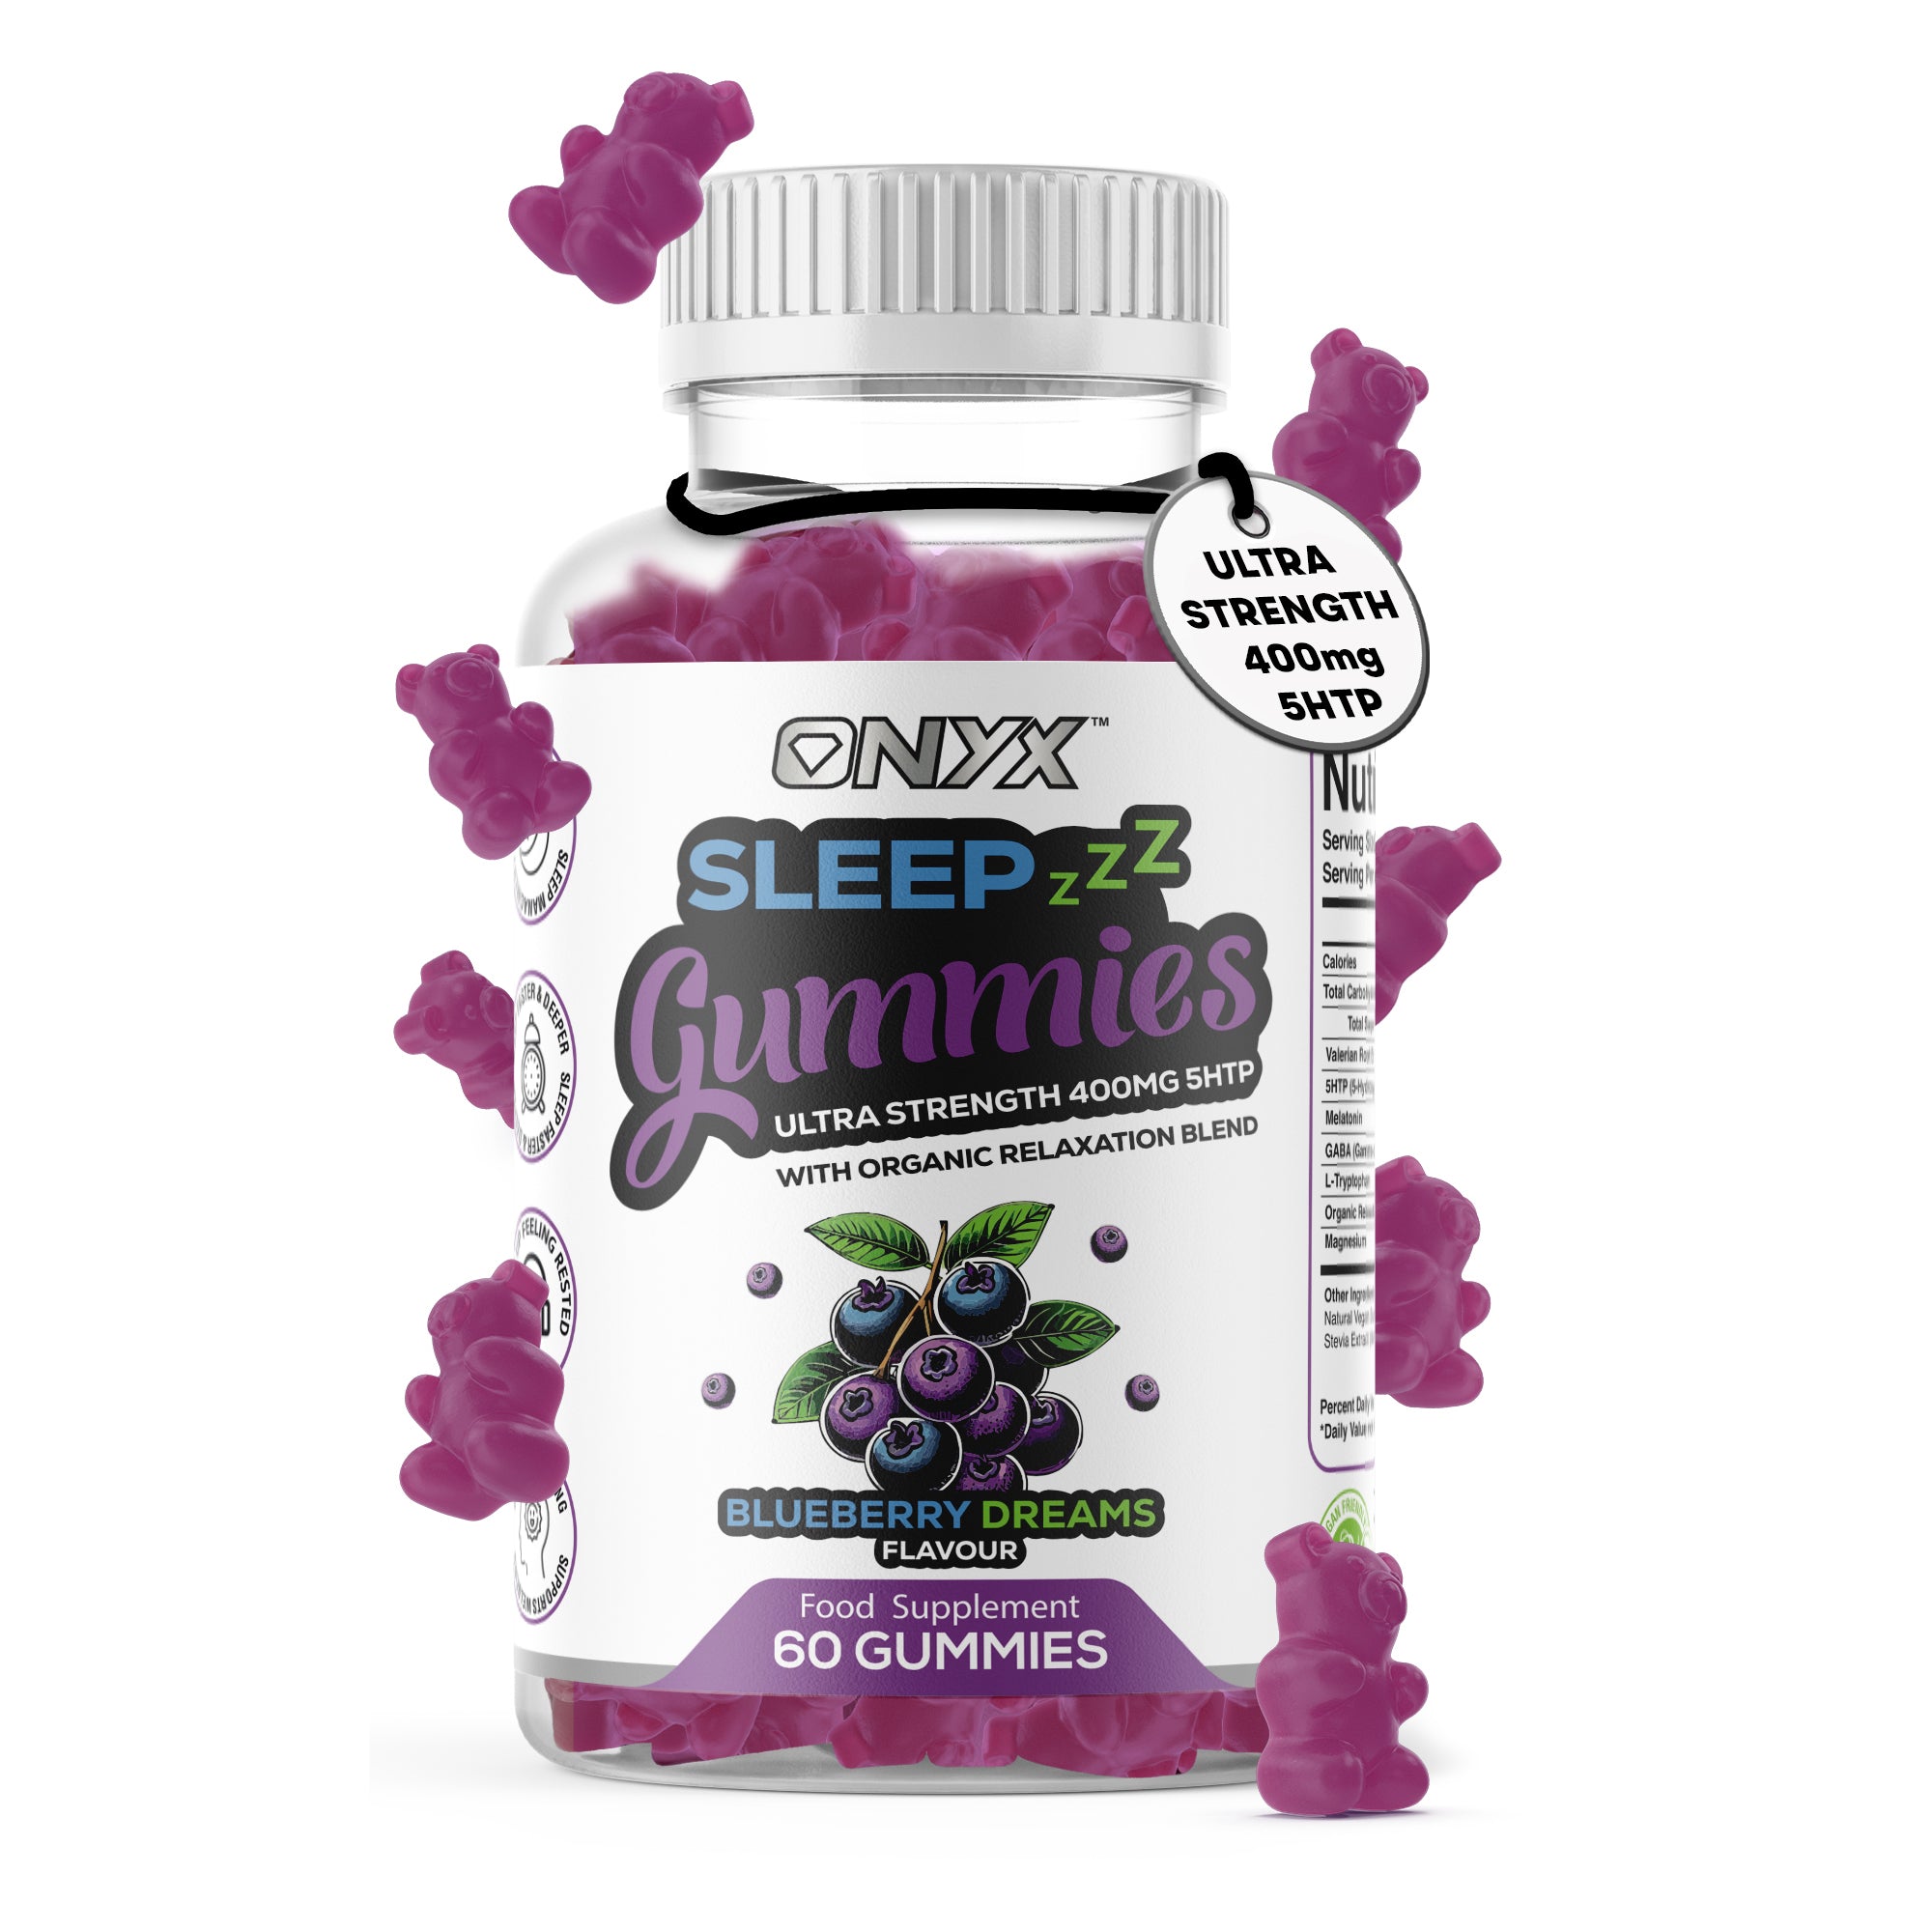 Night-Time Gummies - with Organic Relaxation Blend, Night Time Sleeping Support Supplement